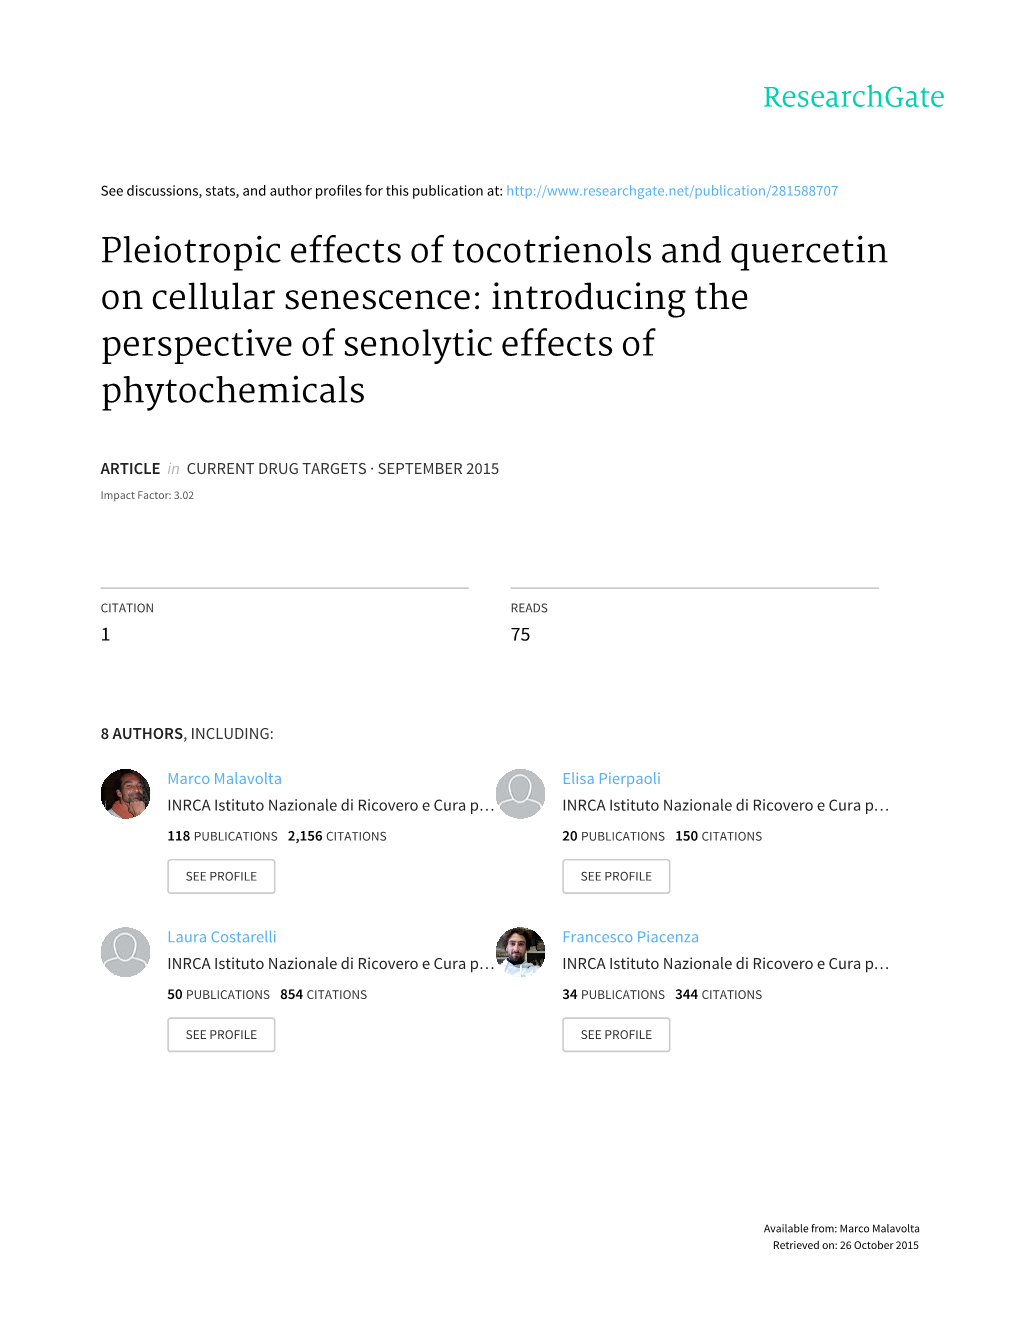 Pleiotropic Effects of Tocotrienols and Quercetin on Cellular Senescence: Introducing the Perspective of Senolytic Effects of Phytochemicals